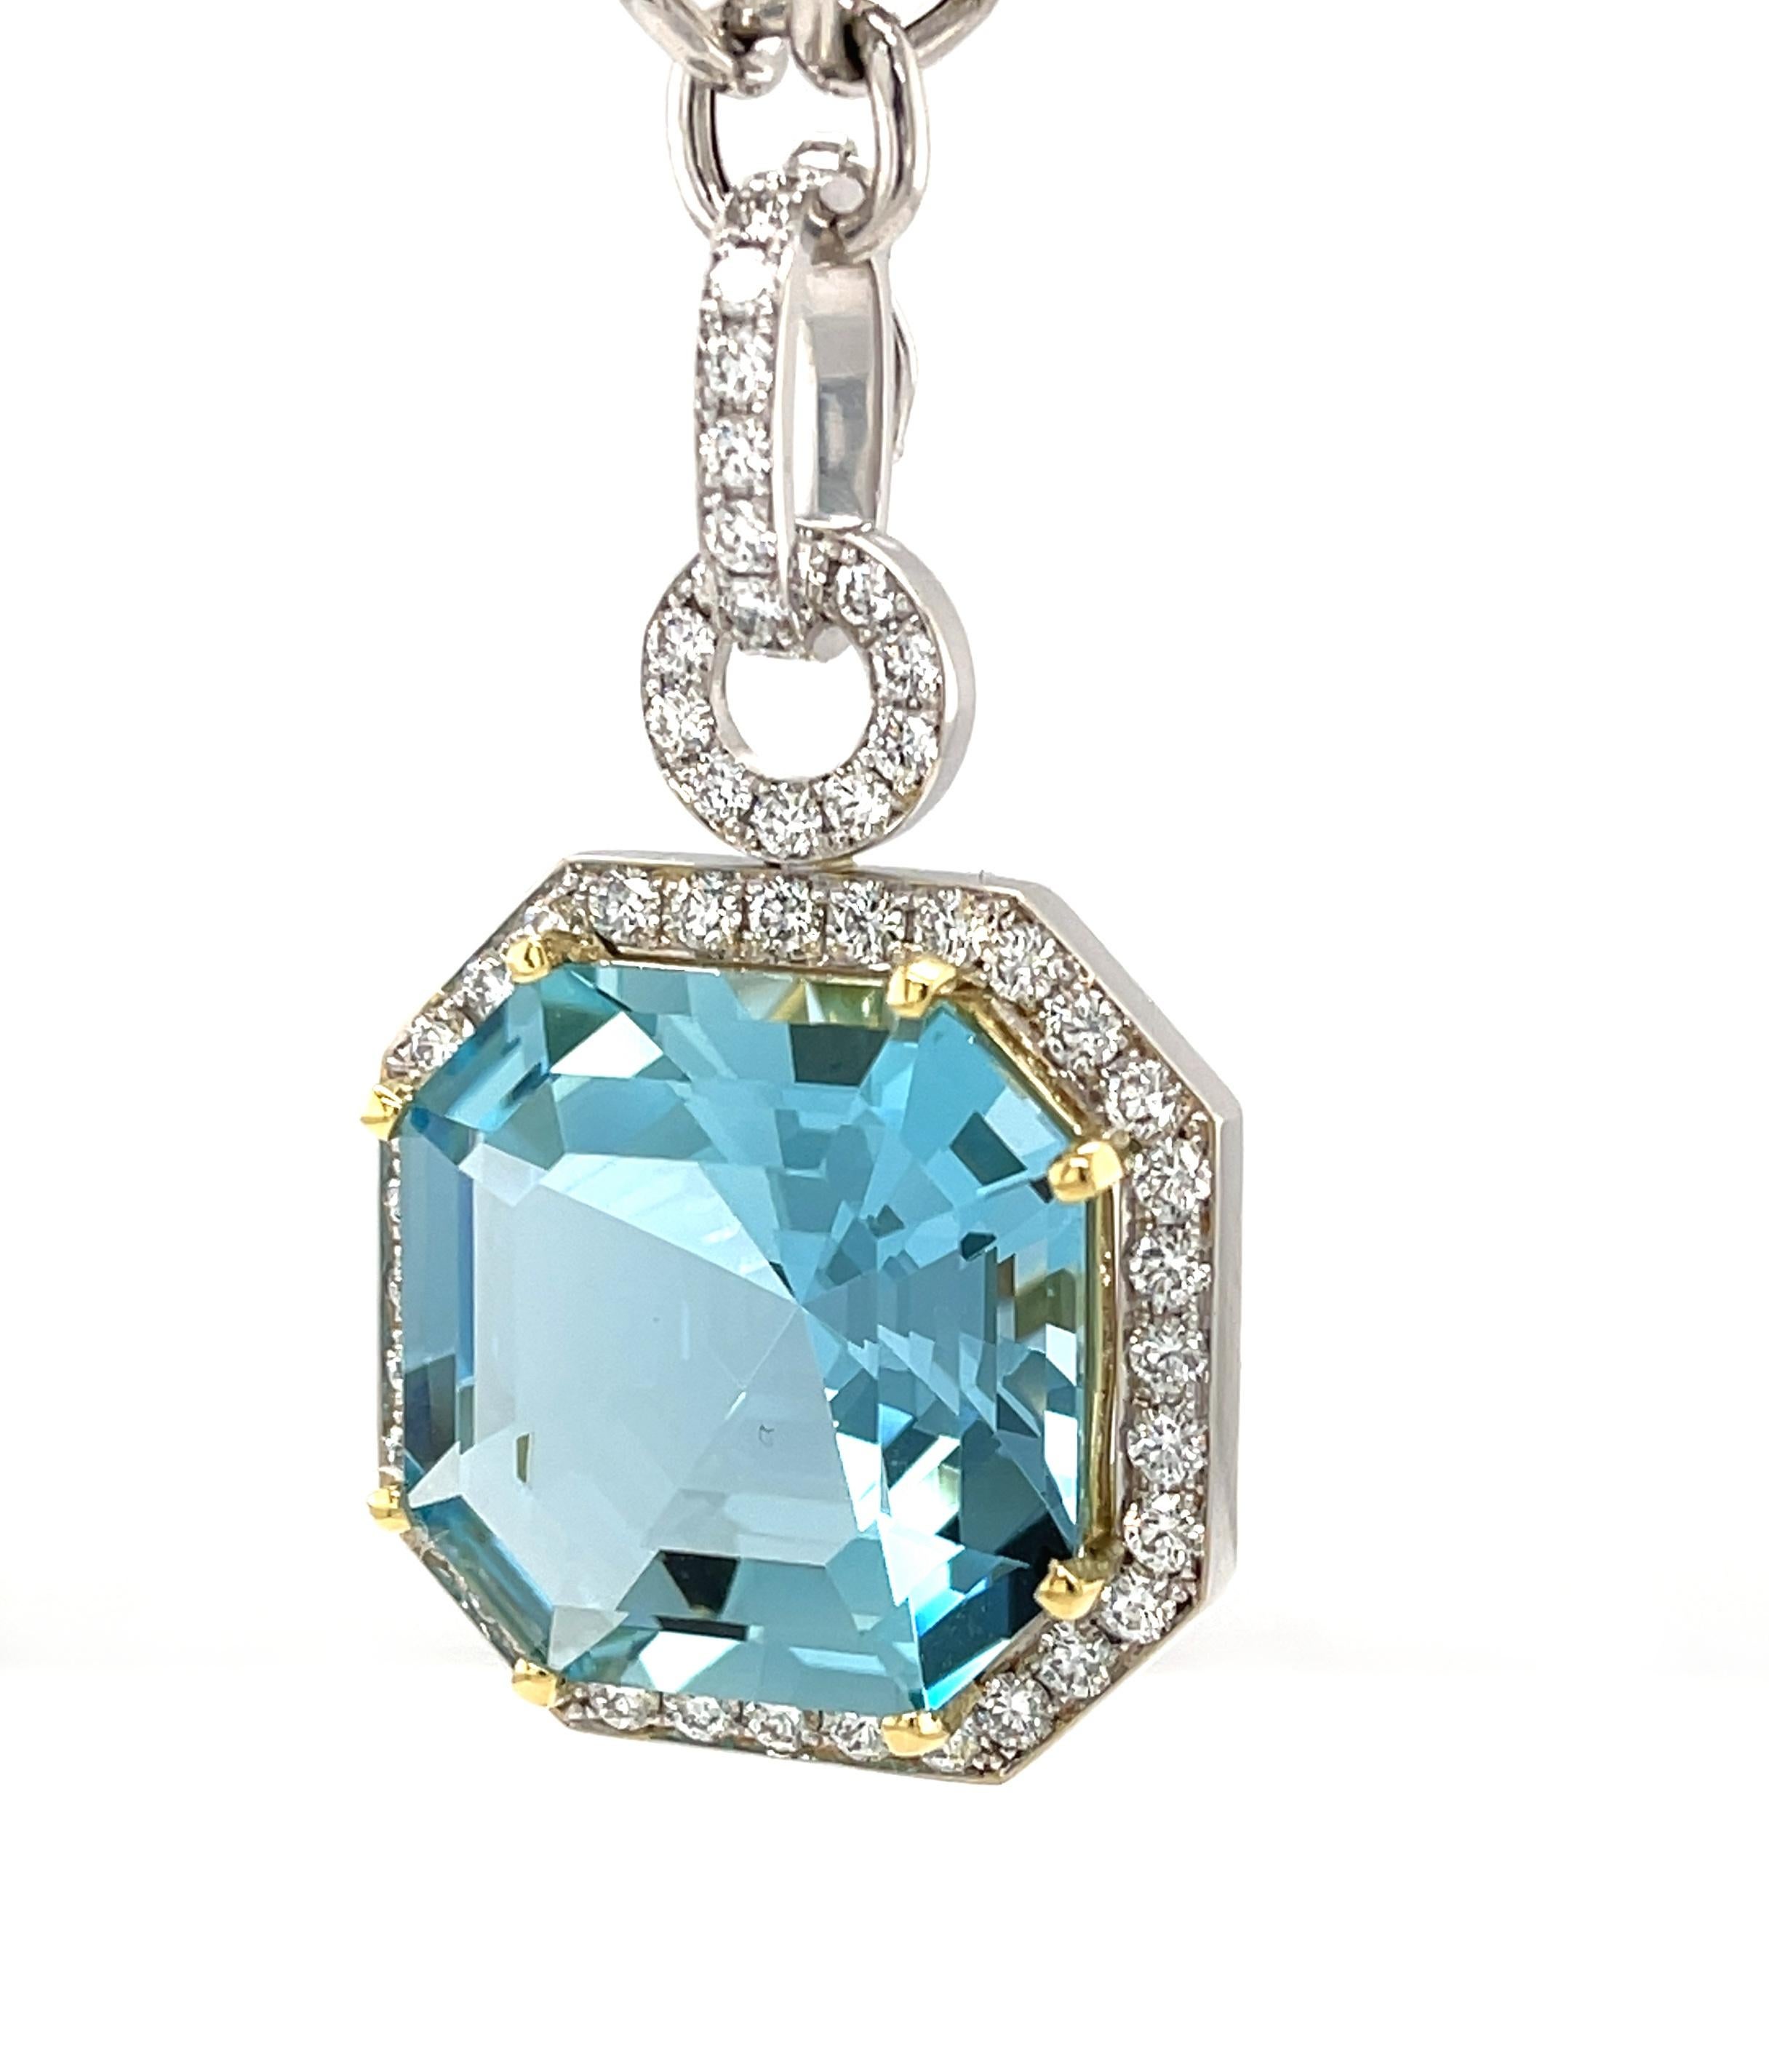 Octagon Cut GIA Certified 23 Carat Aquamarine and Diamond Necklace in White and Yellow Gold For Sale